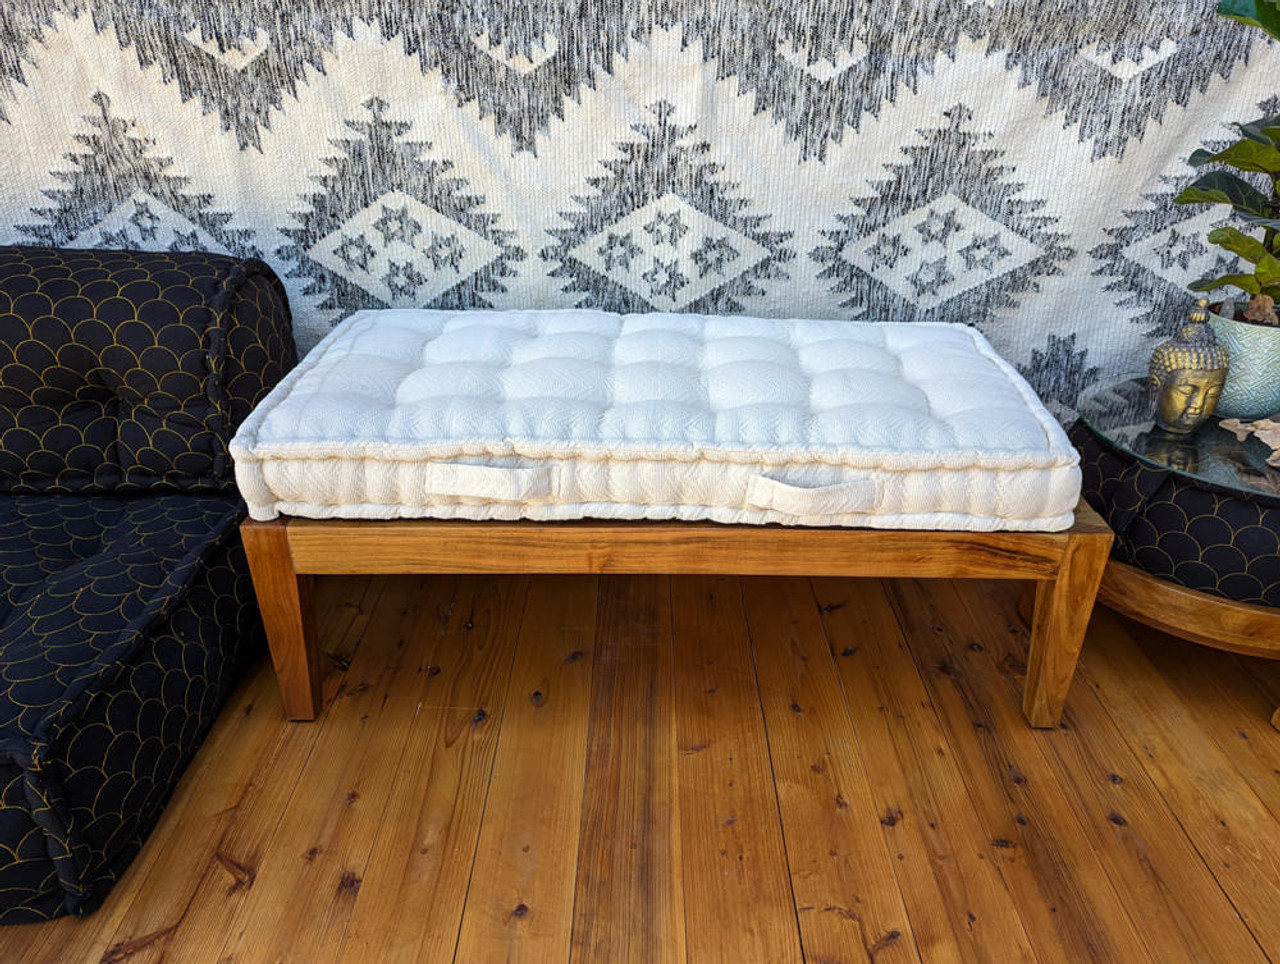 https://cdn11.bigcommerce.com/s-ndgwf6iffo/images/stencil/1280x1280/products/2465/11316/indie-ella-double-lark-bohemian-quilted-canvas-french-mattress-cushion-in-cream-jacquard__78111.1661595693.jpg?c=2